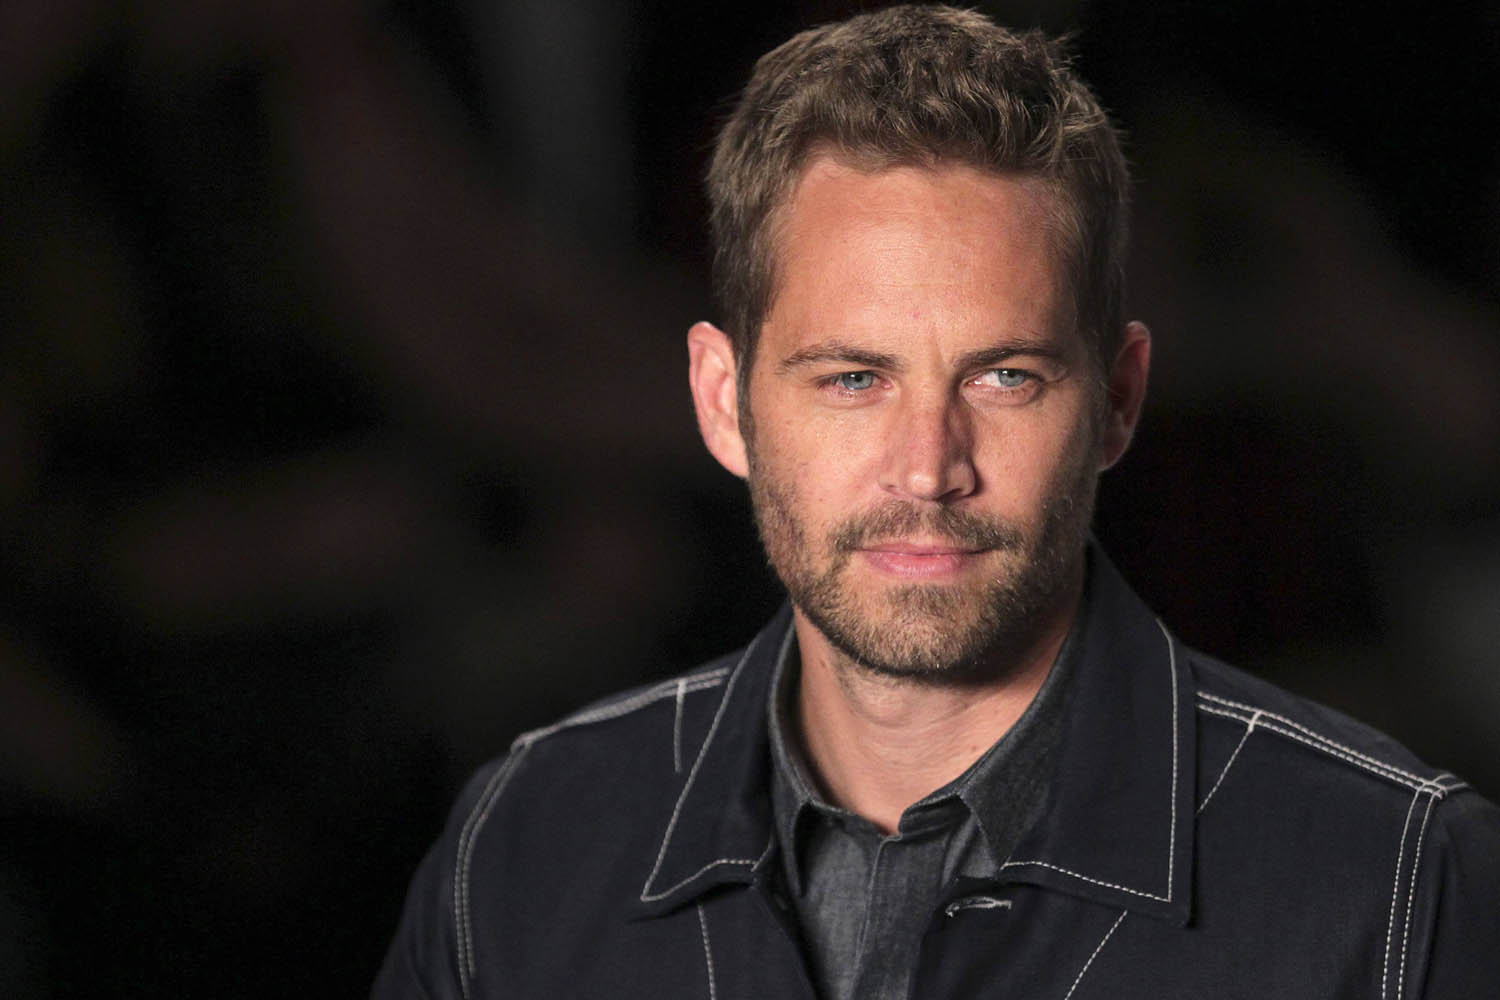 U.S.+actor+Paul+Walker+presents+a+creation+during+Sao+Paulo+Fashion+Week+in+this+file+photo+taken+March+21%2C+2013.+Walker%2C+best+known+for+his+roles+in+the+Fast+and+the+Furious+action+movies%2C+died+on+Saturday+in+a+car+crash+in+Southern+California%2C+his+publicist+said.++REUTERS%2FFilipe+Carvalho%2FFiles++%28BRAZIL+-+Tags%3A+OBITUARY+ENTERTAINMENT%29